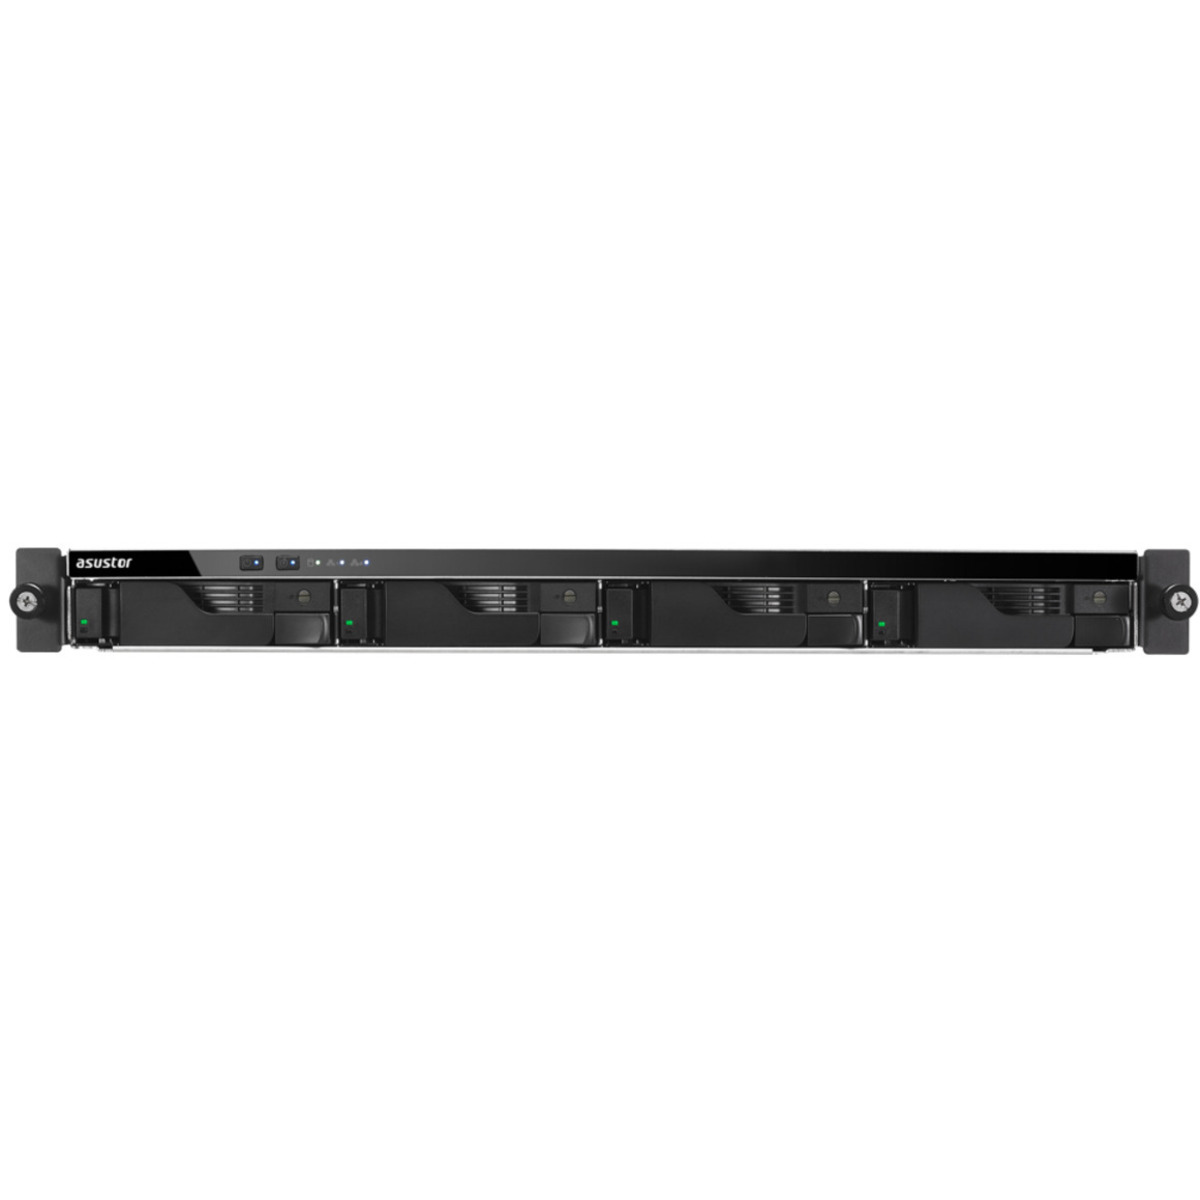 ASUSTOR LOCKERSTOR 4RS AS6504RS 12tb 4-Bay RackMount Multimedia / Power User / Business NAS - Network Attached Storage Device 3x4tb Seagate IronWolf Pro ST4000NT001 3.5 7200rpm SATA 6Gb/s HDD NAS Class Drives Installed - Burn-In Tested - FREE RAM UPGRADE LOCKERSTOR 4RS AS6504RS